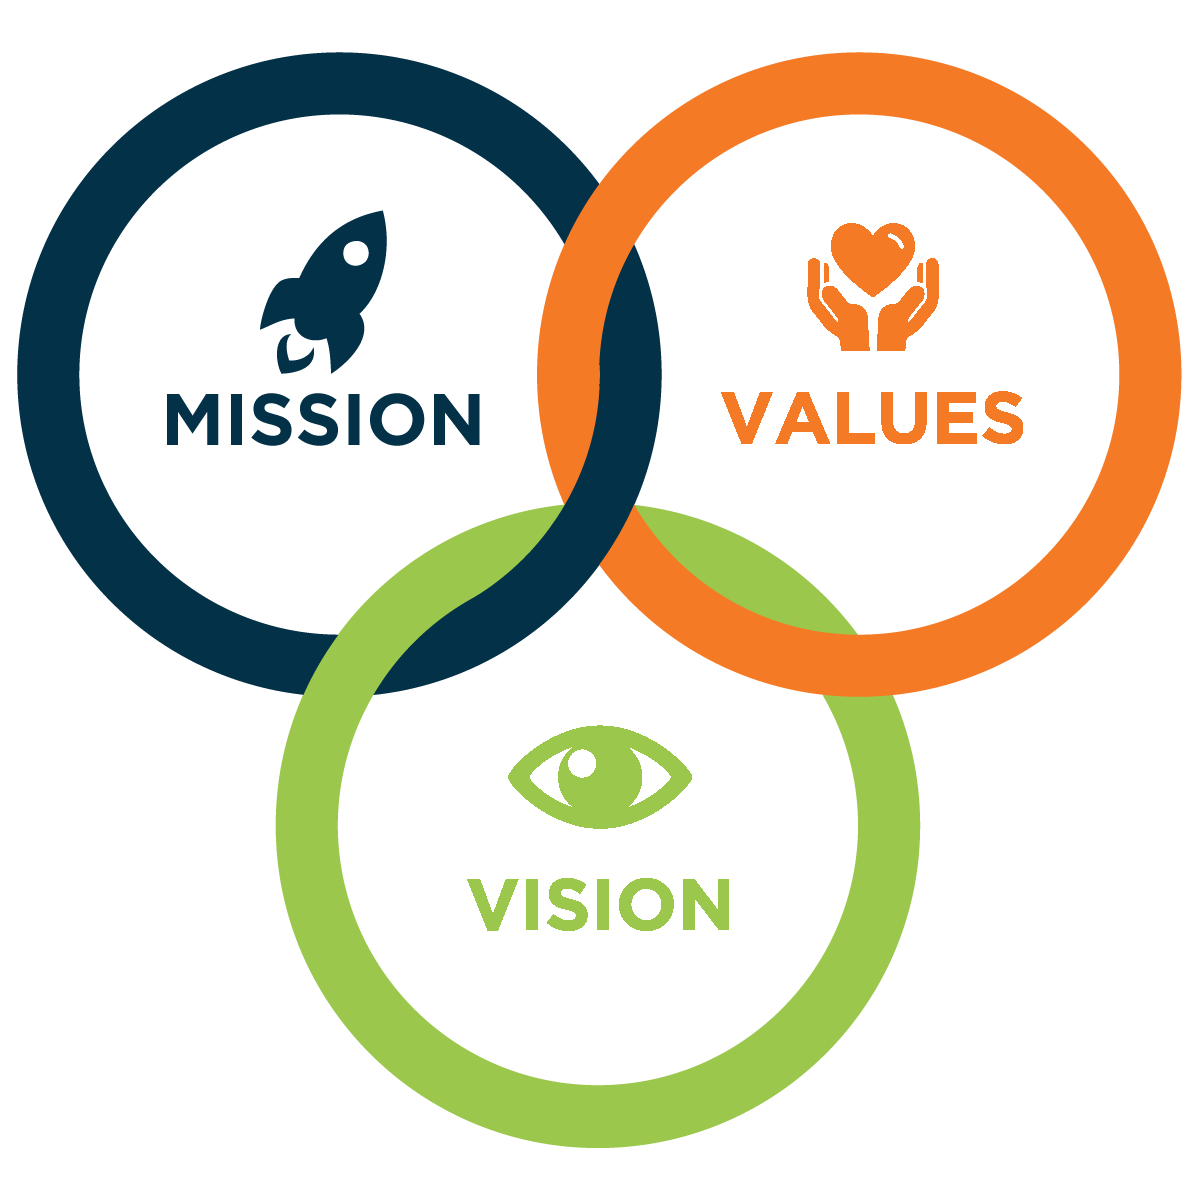 Mission and Values